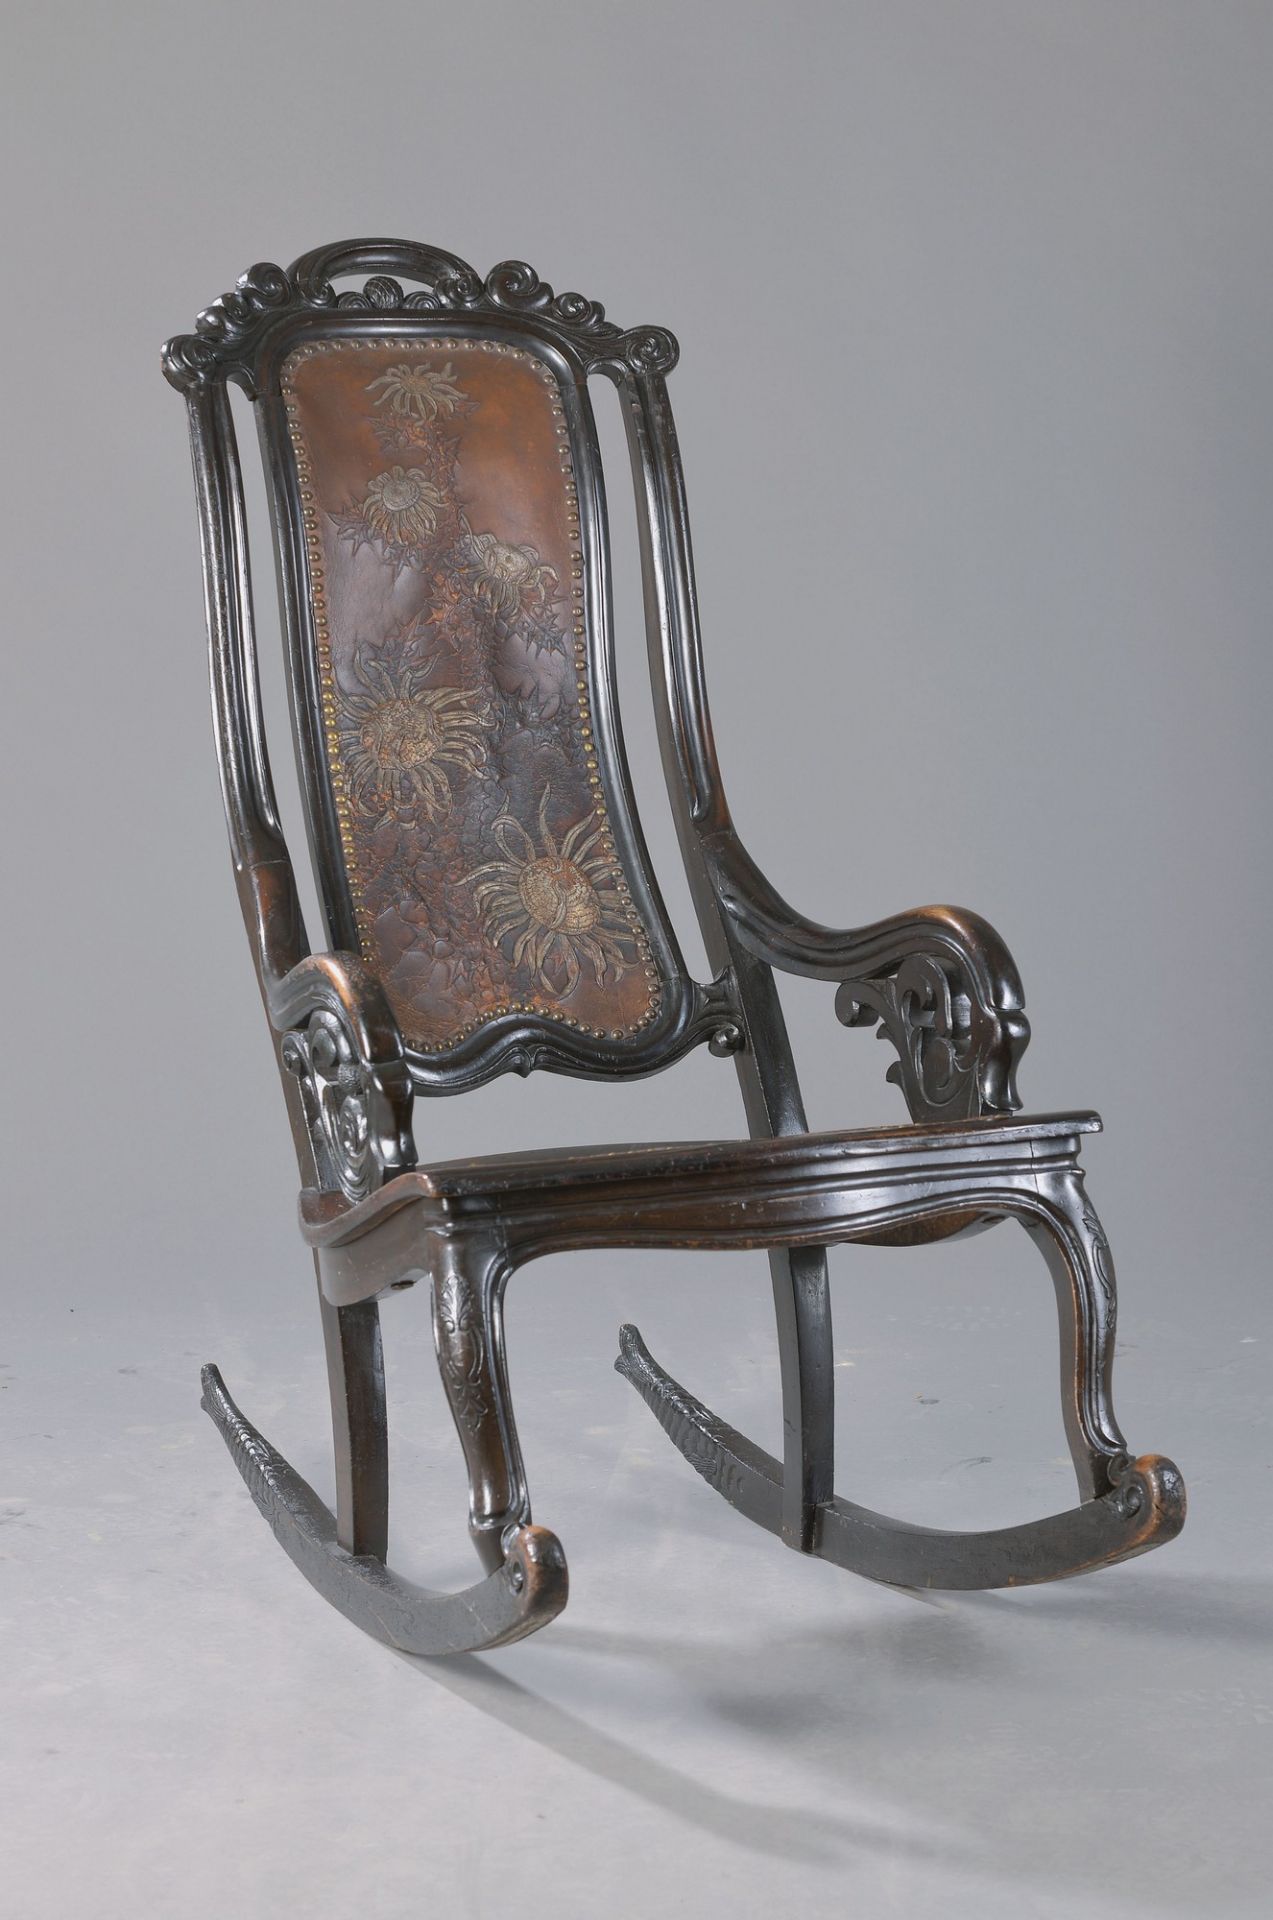 rocking chair of Georg Hulbe (1851 Kiel- 1917 Hamburg), one of the most famous book binder and